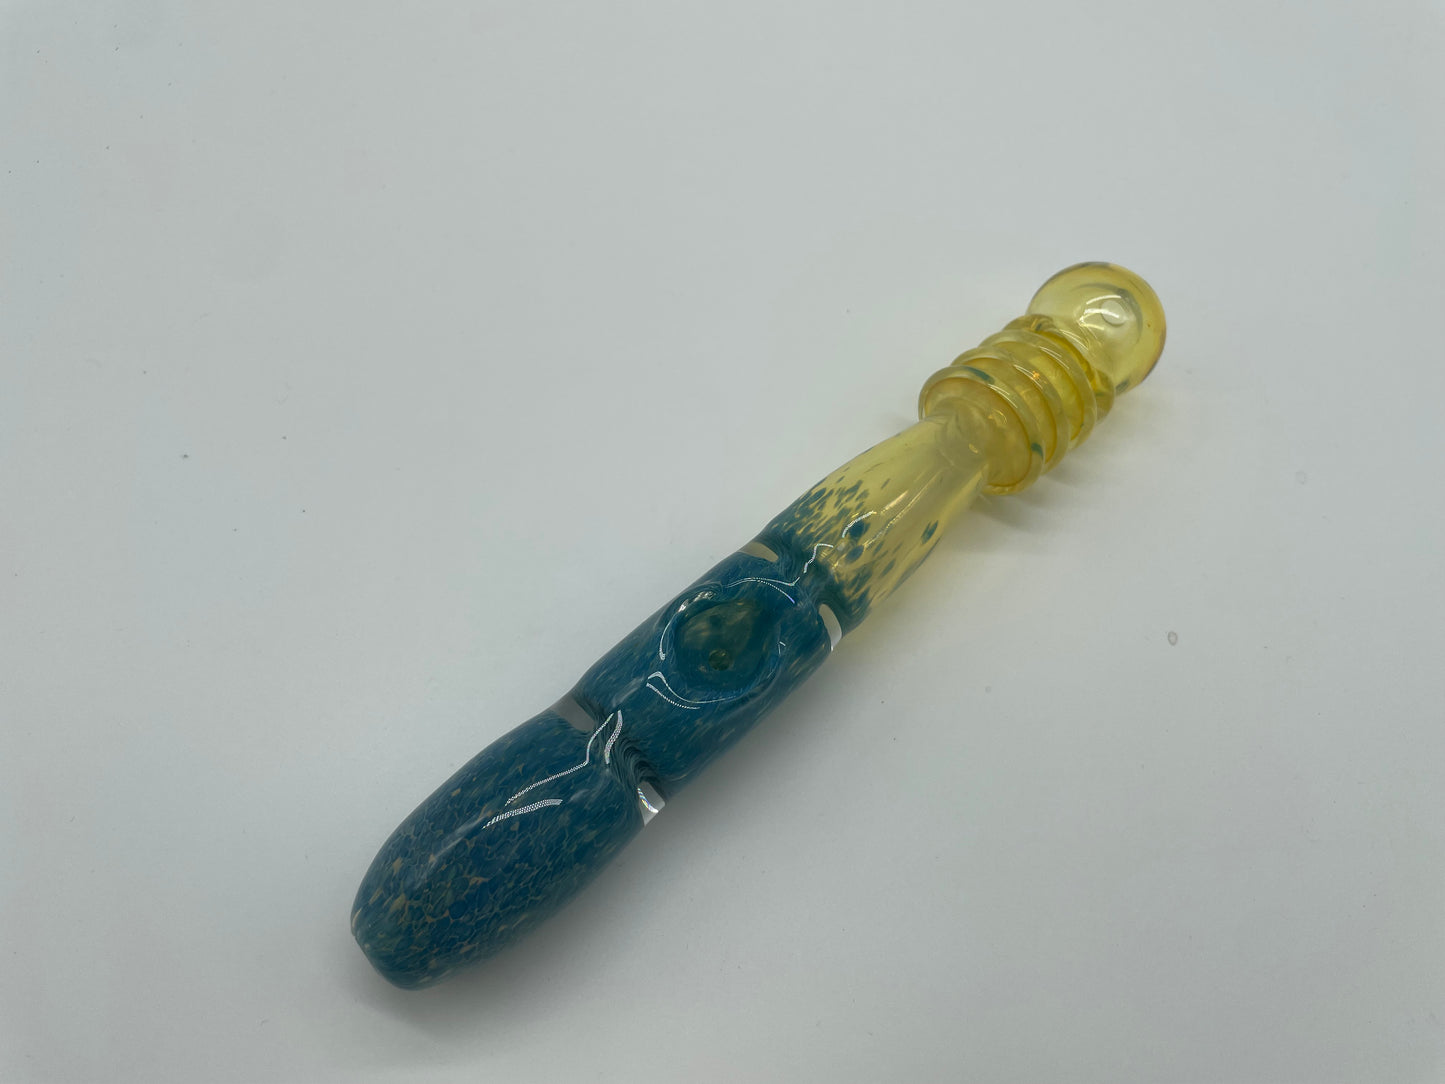 Steamroller 8" Handpipe Frit Pinched